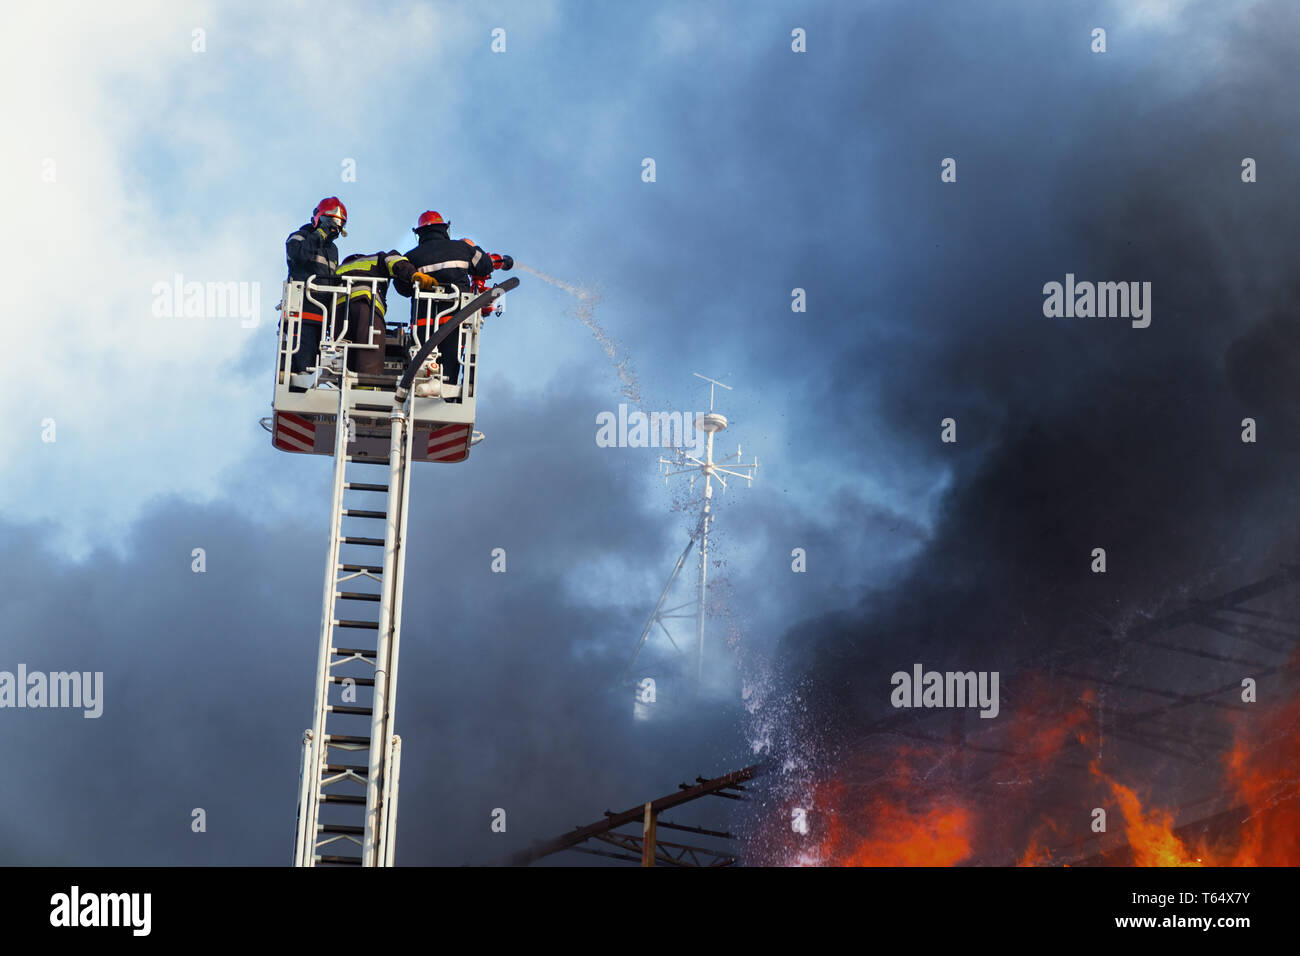 Firefighters extinguish a big fire Stock Photo